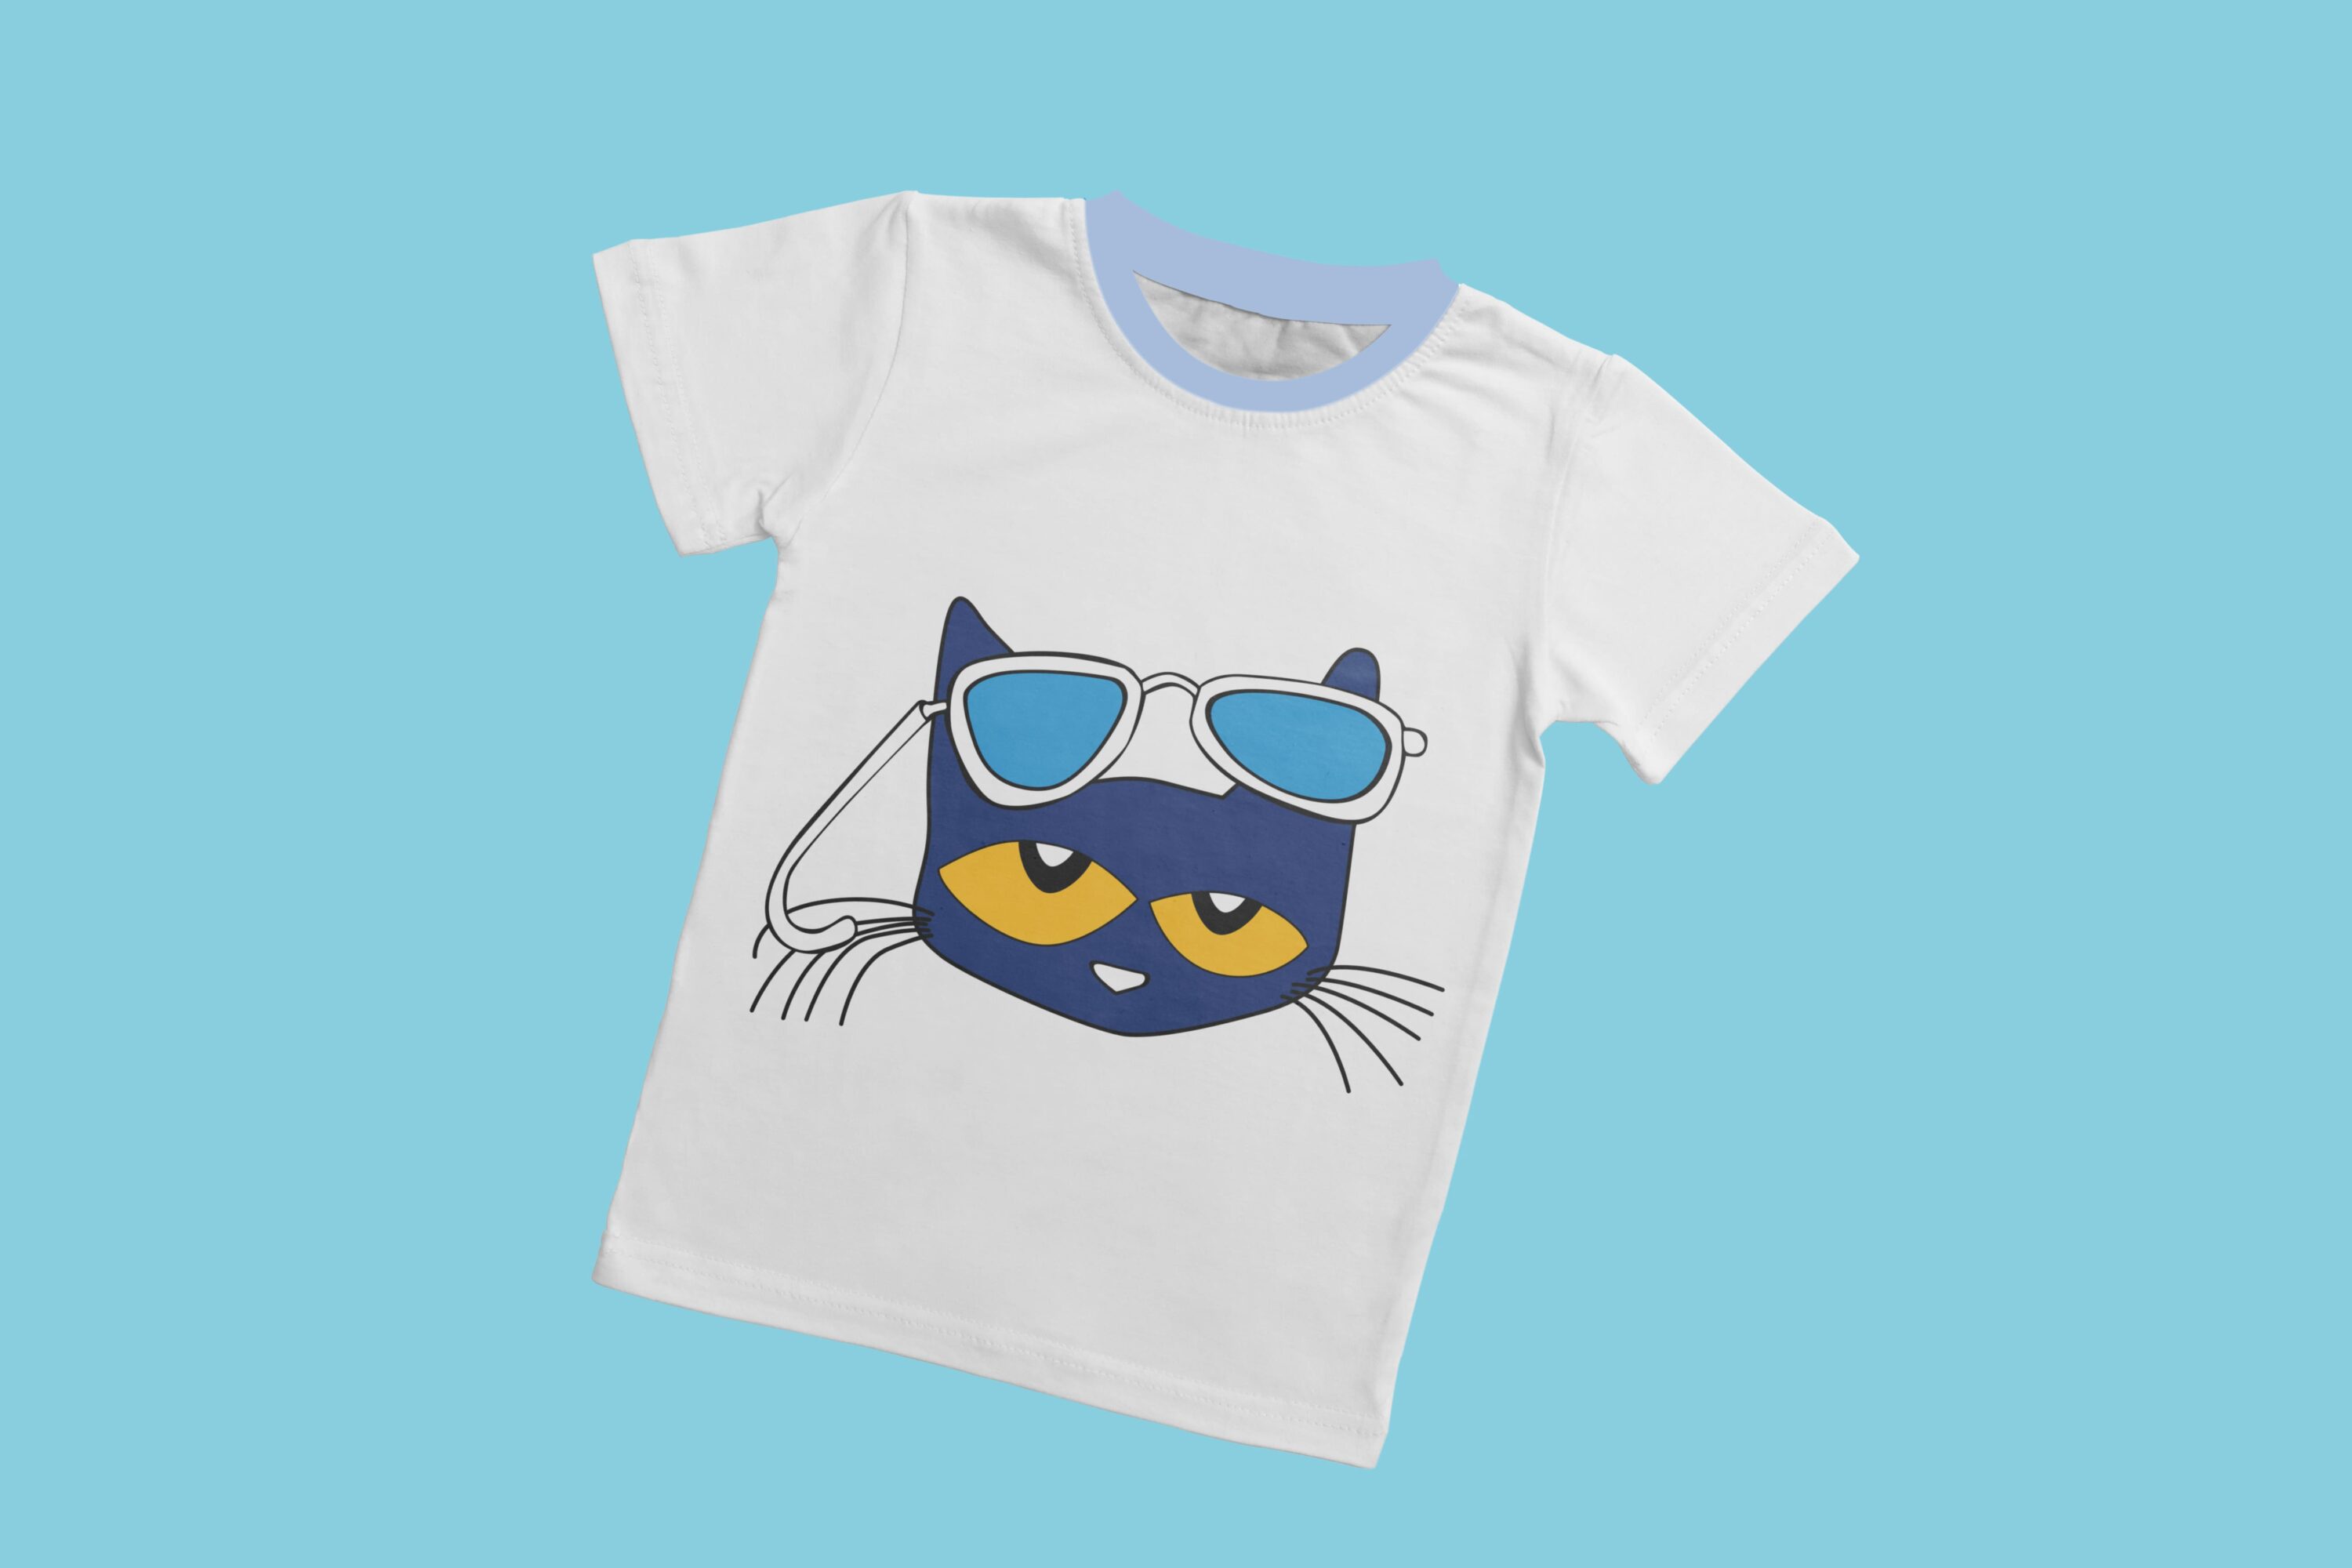 A white t-shirt with a light blue collar and the face of Pete the cat with yellow eyes and glasses.